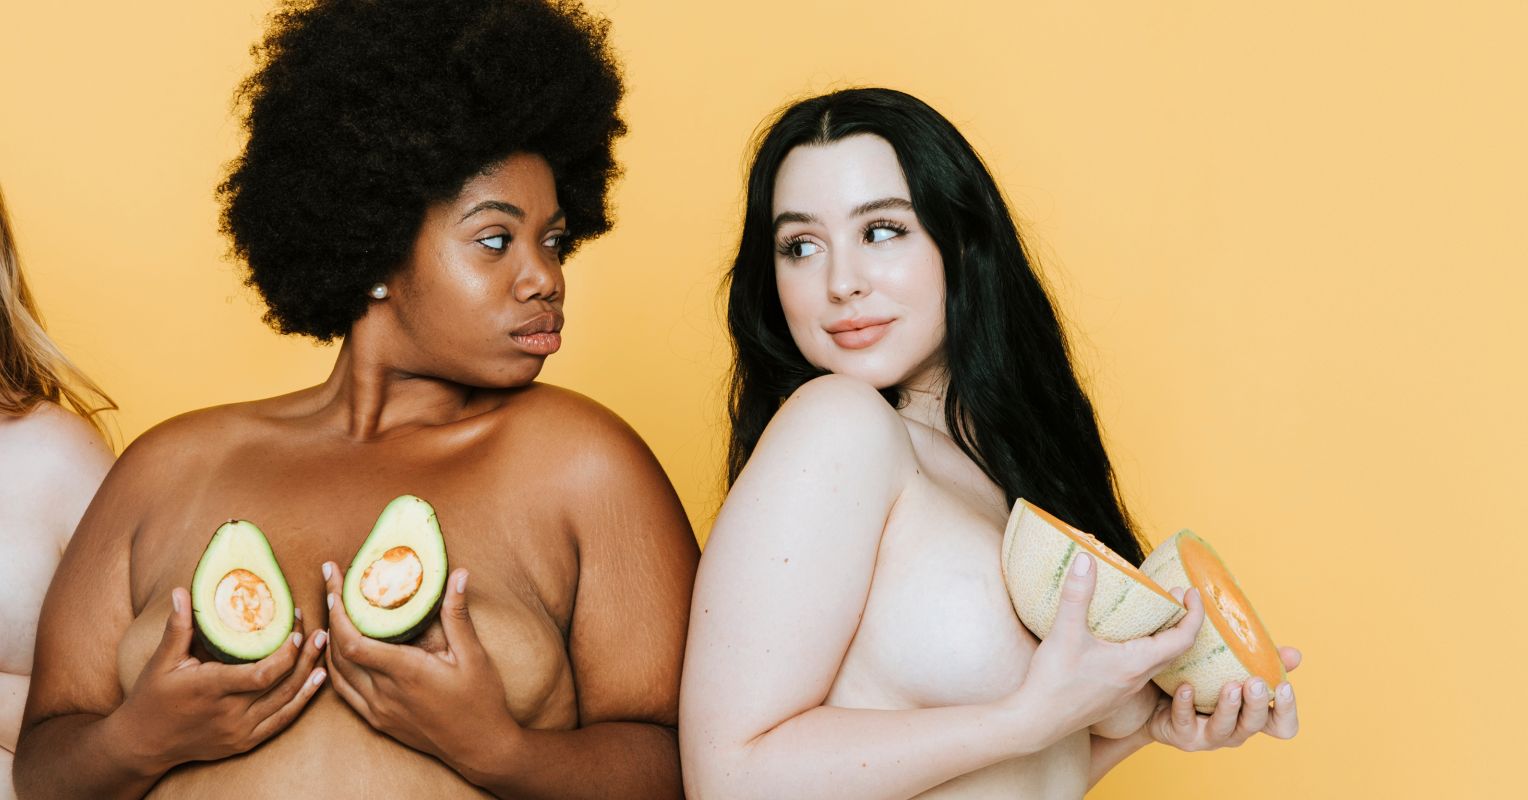 Why Aren't Women Satisfied With Their Breasts?